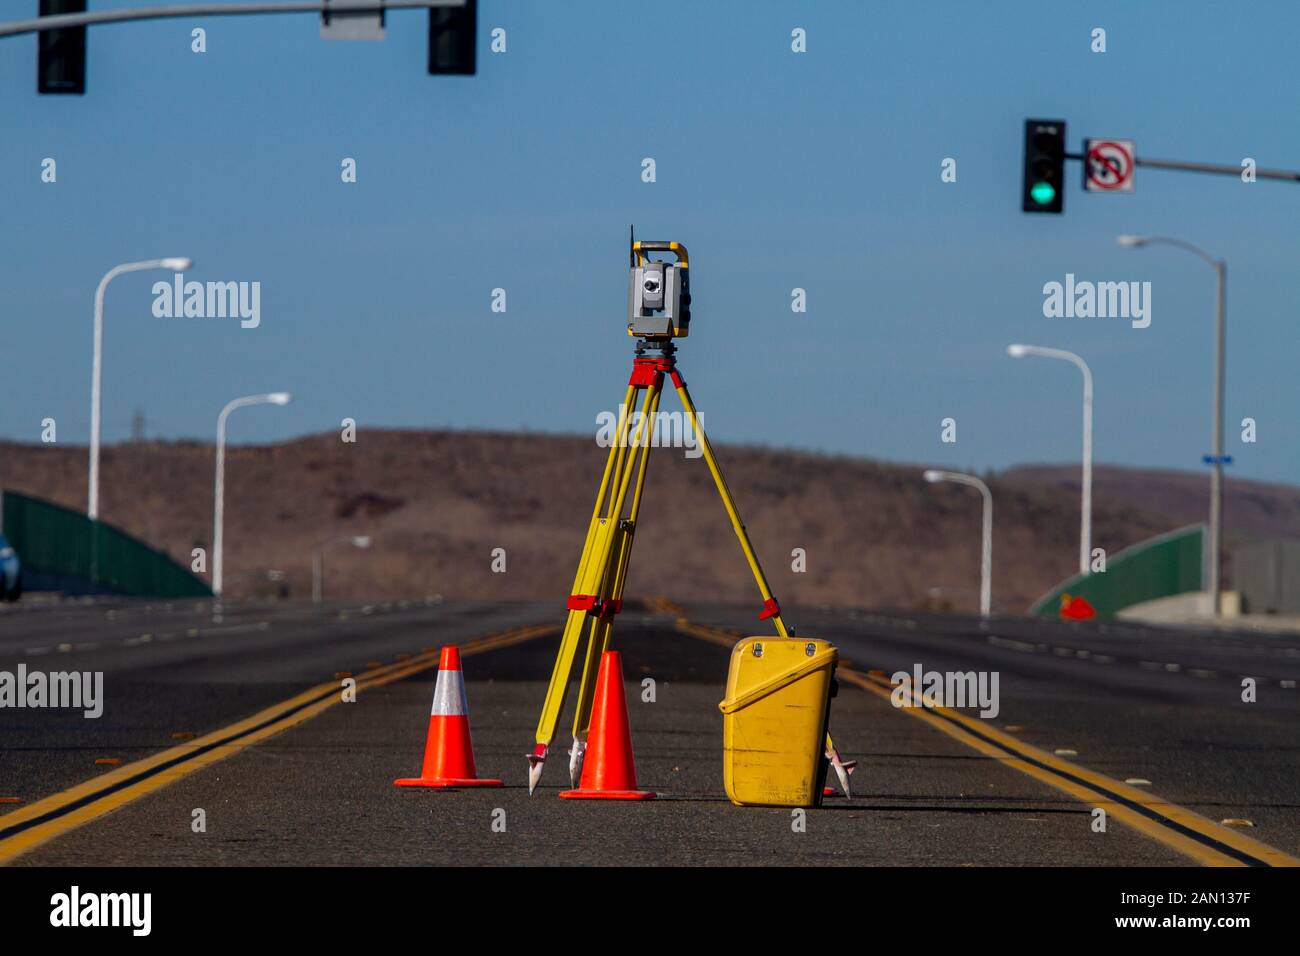 Land survey equipment set up on road with road becoming a hill in the background with traffic Stock Photo